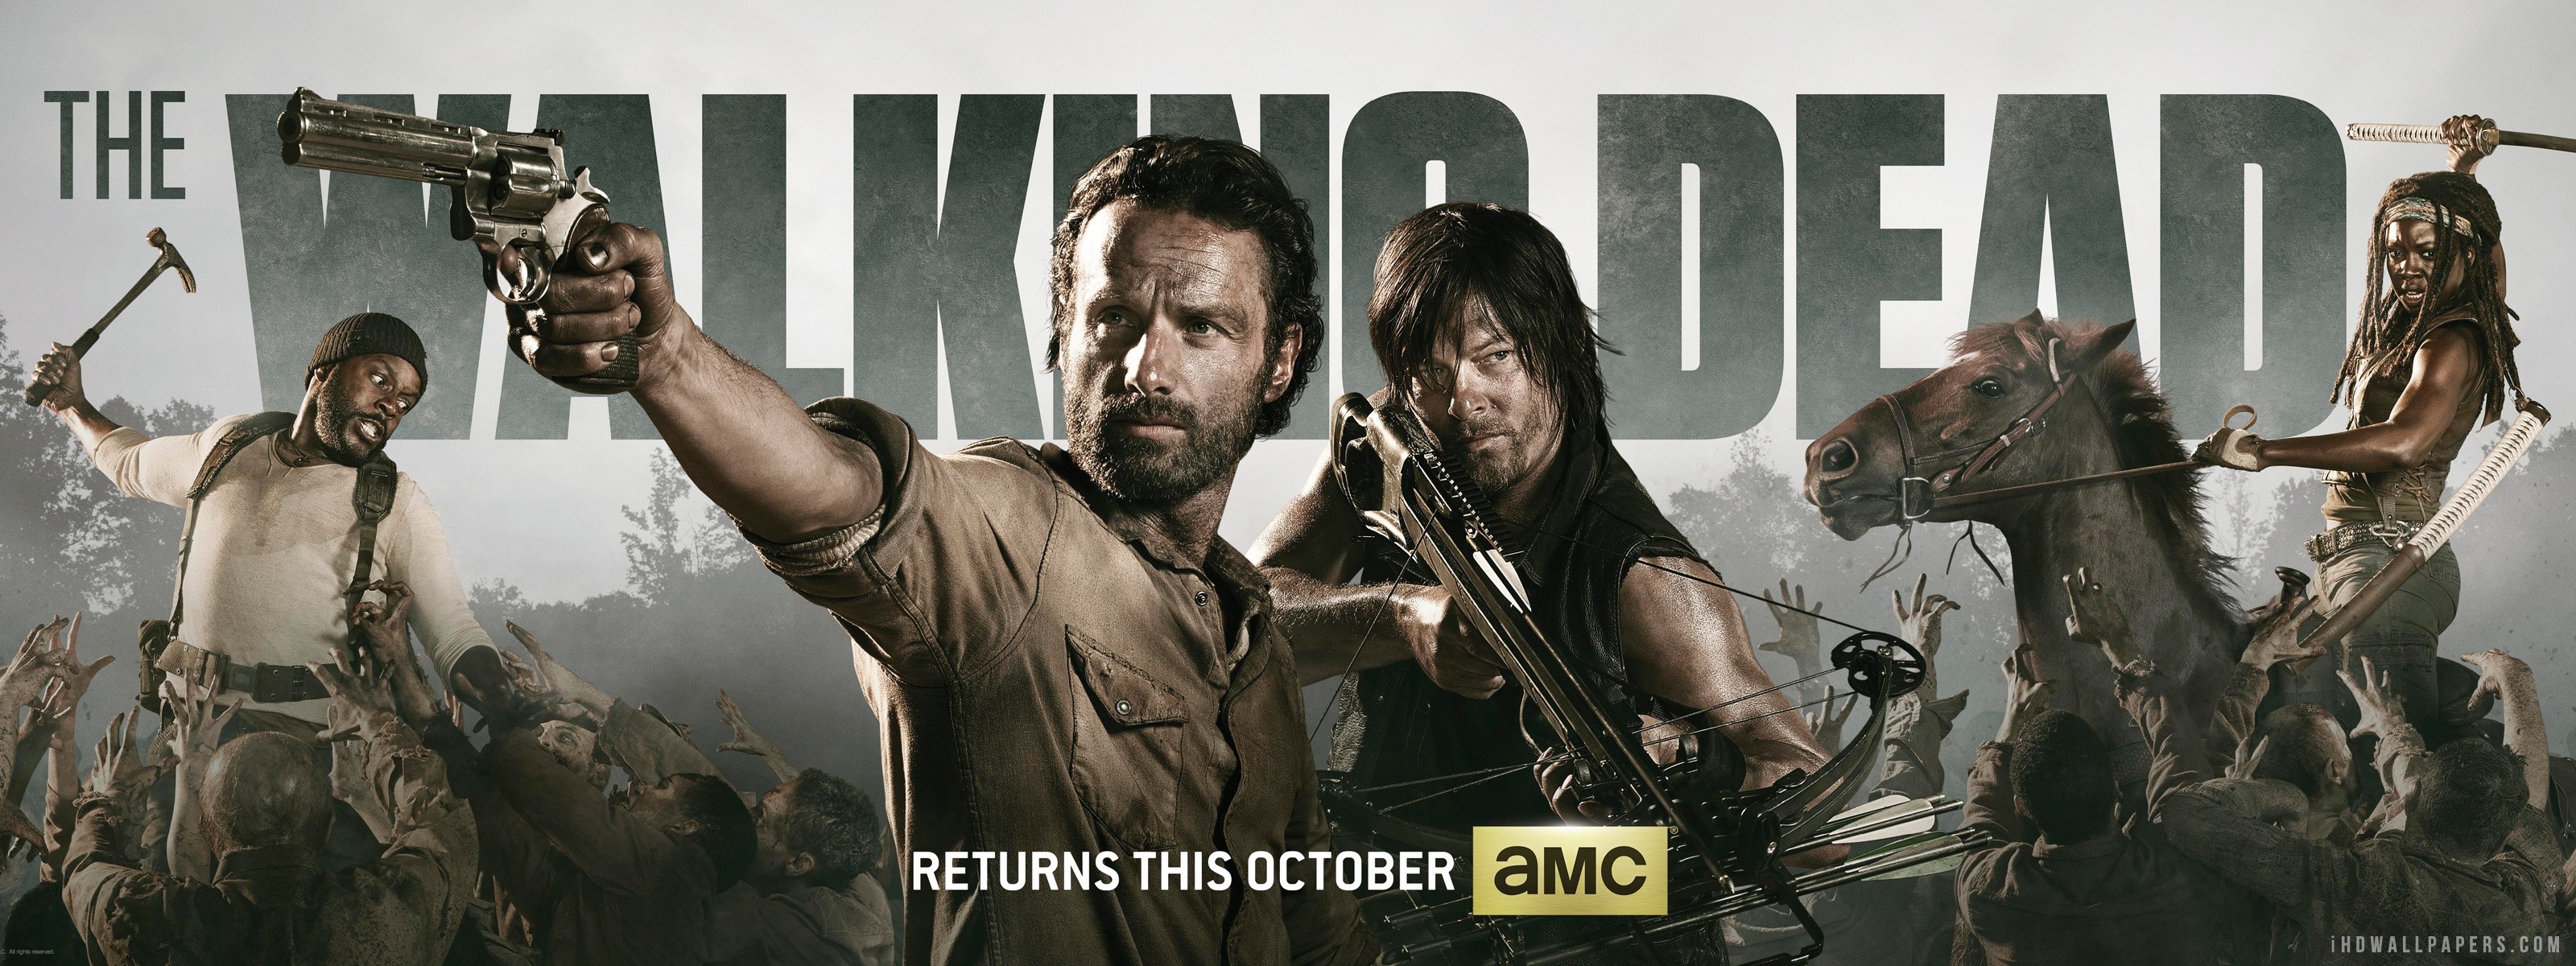 3200x1200  px Walking Dead Season 4 Widescreen Image | Amazing Images - HD  Wallpapers